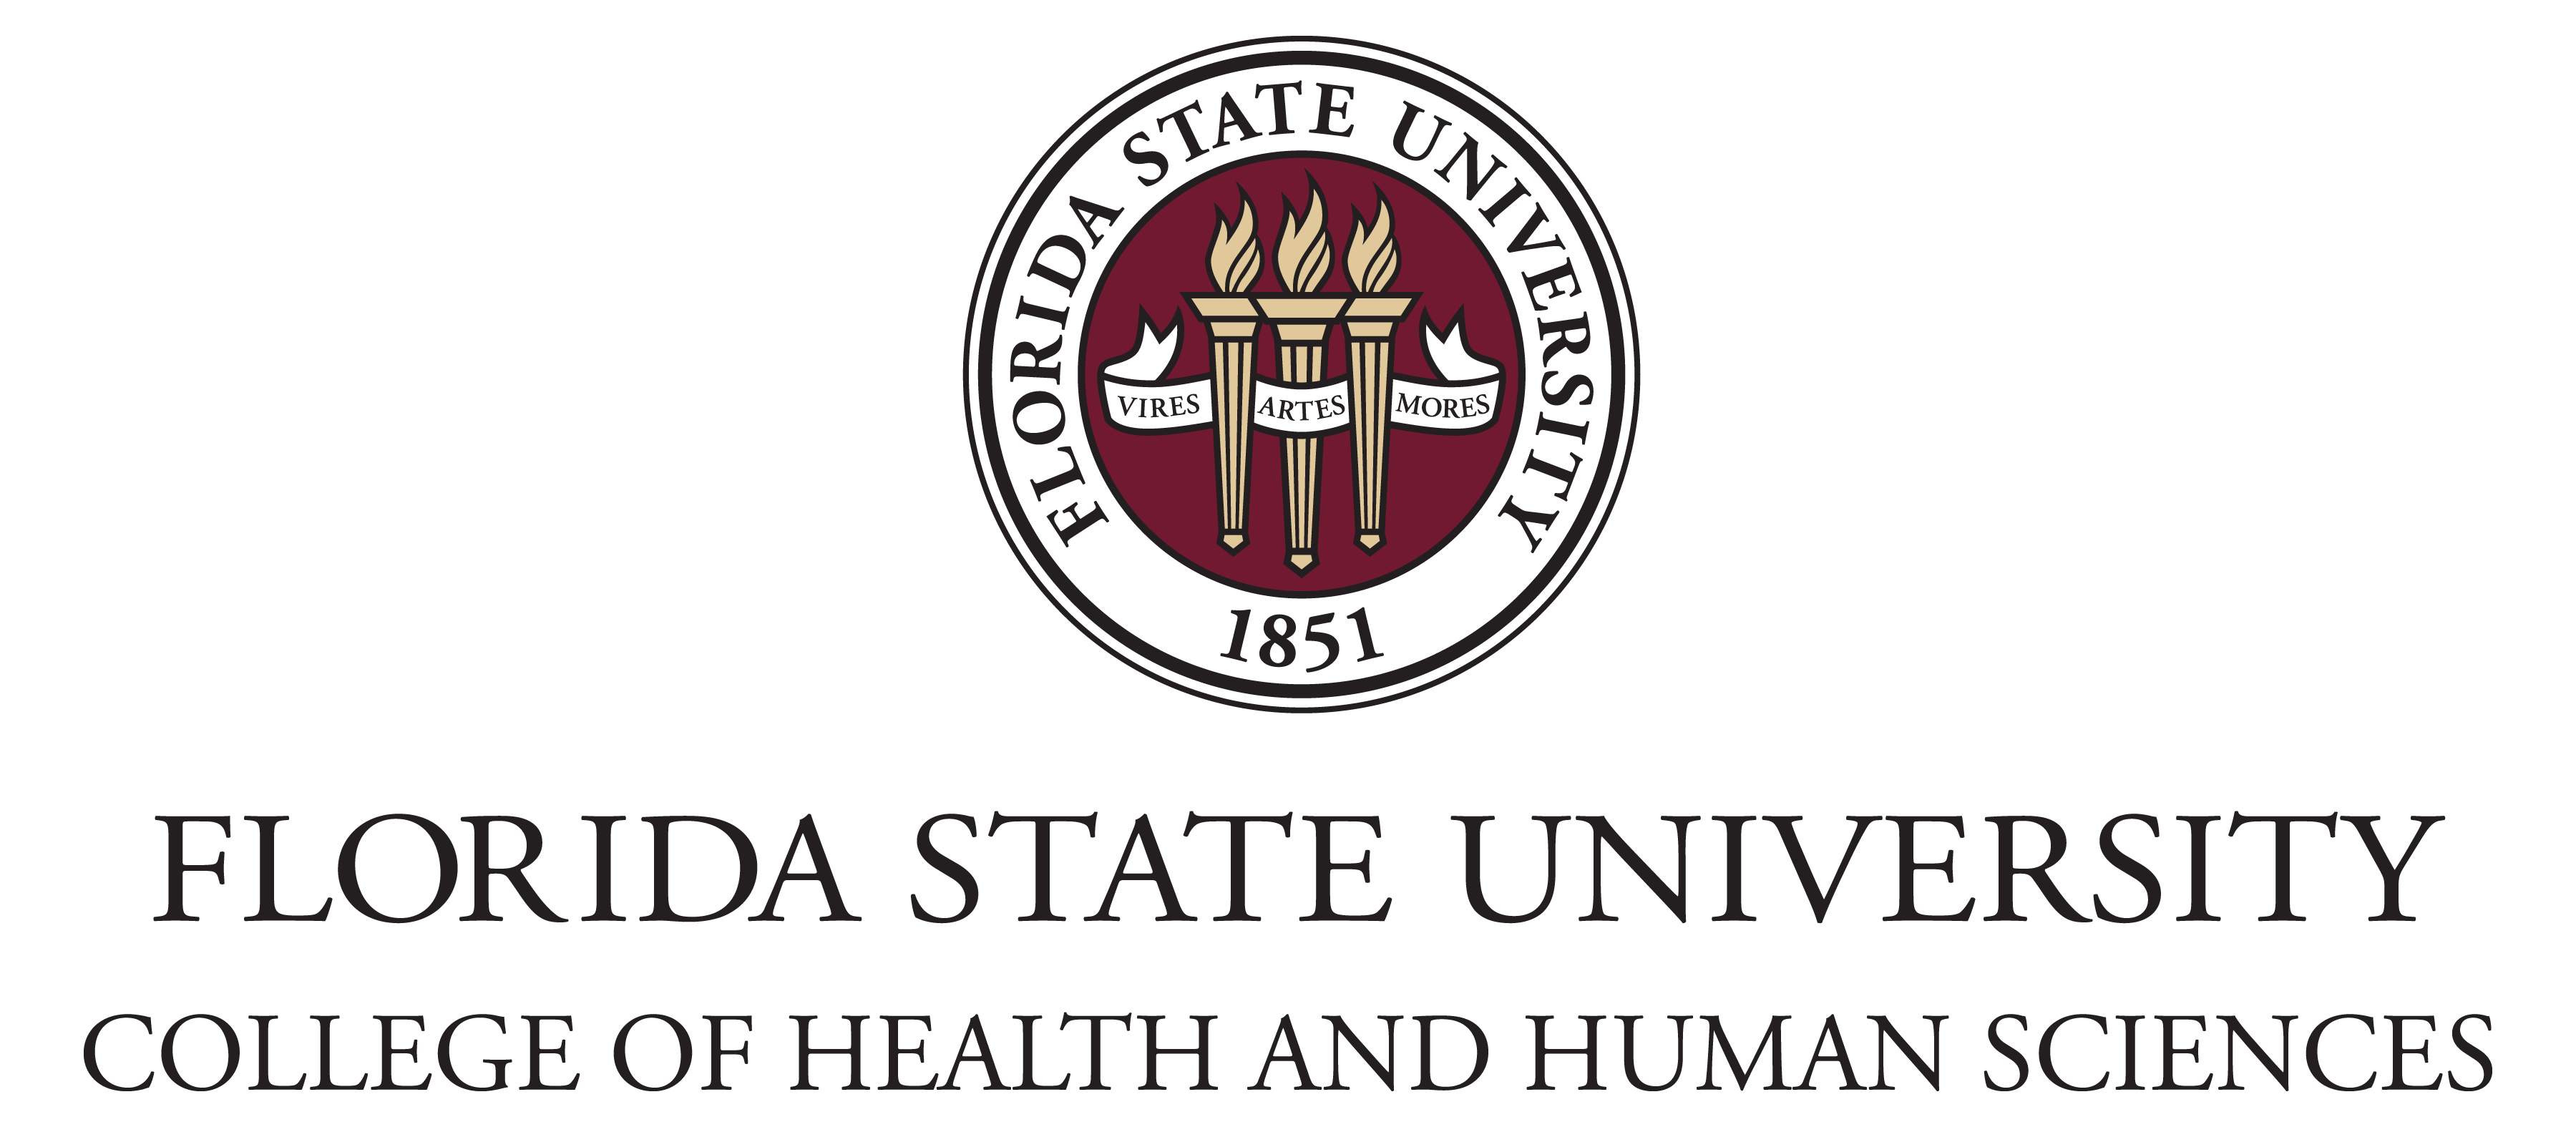 Florida State University College of Health and Human Sciences